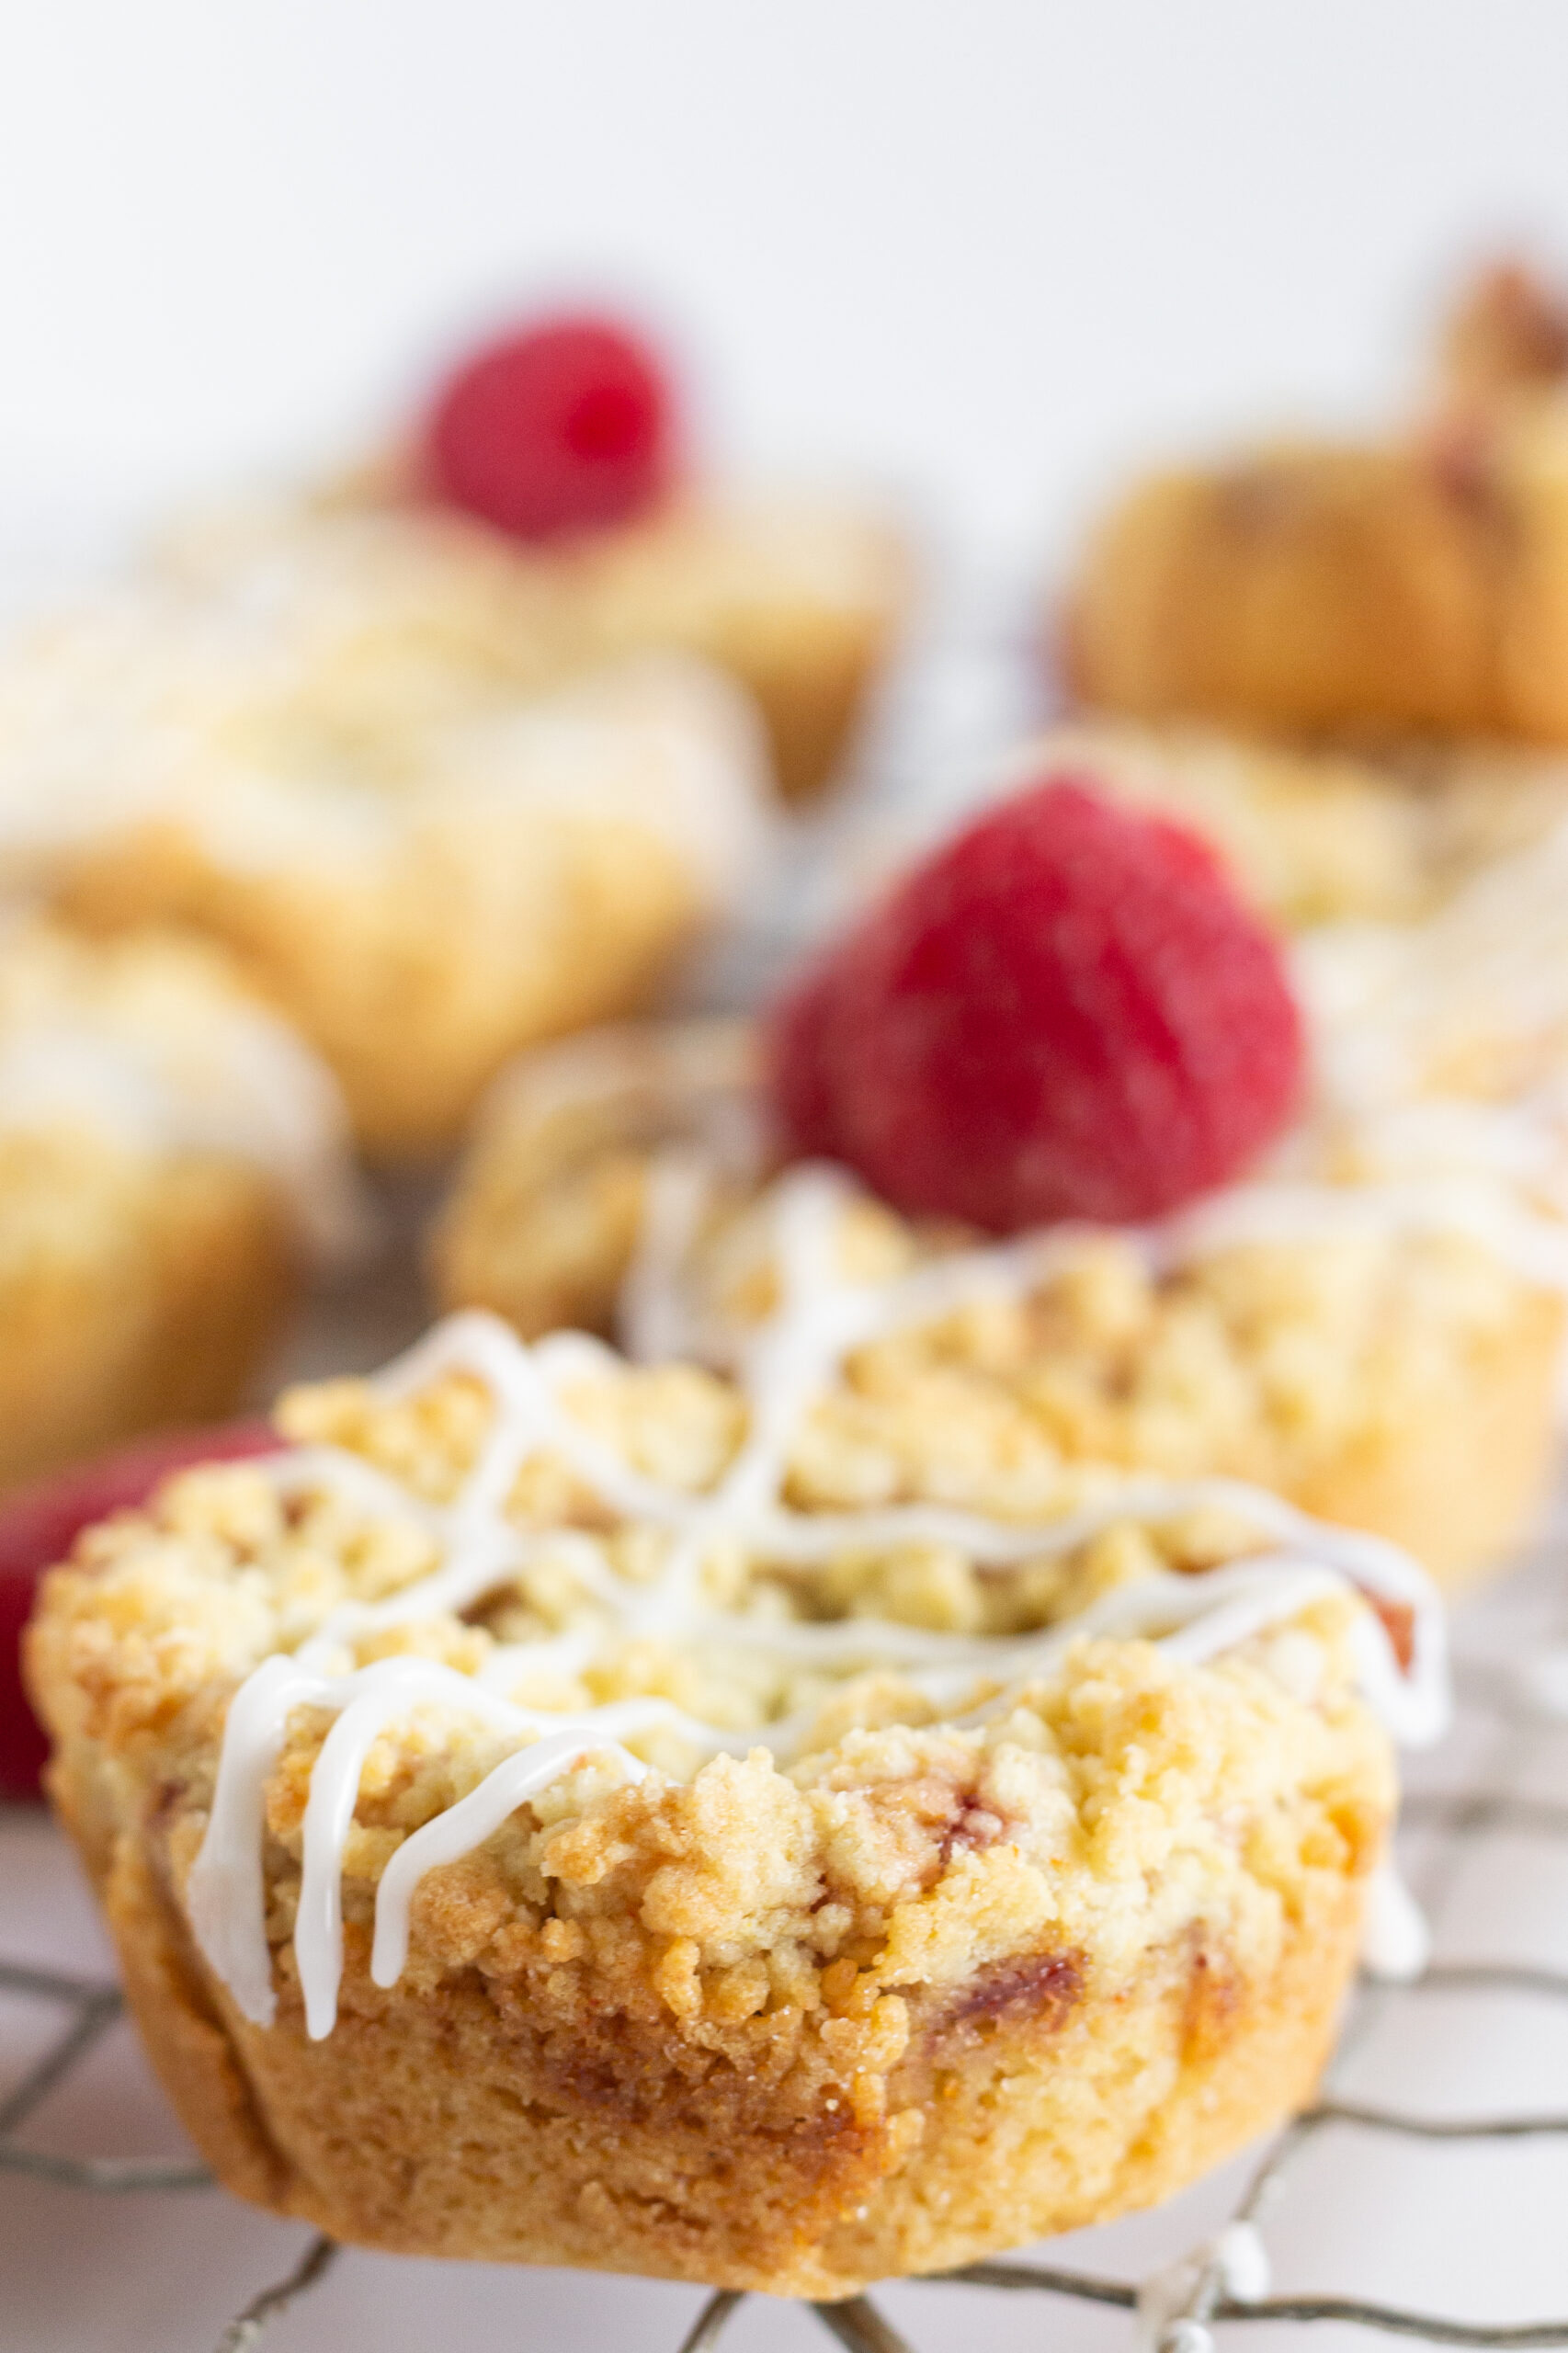 Easy Raspberry Crumble Cookies, by Top US Cookie blog Practically Homemade